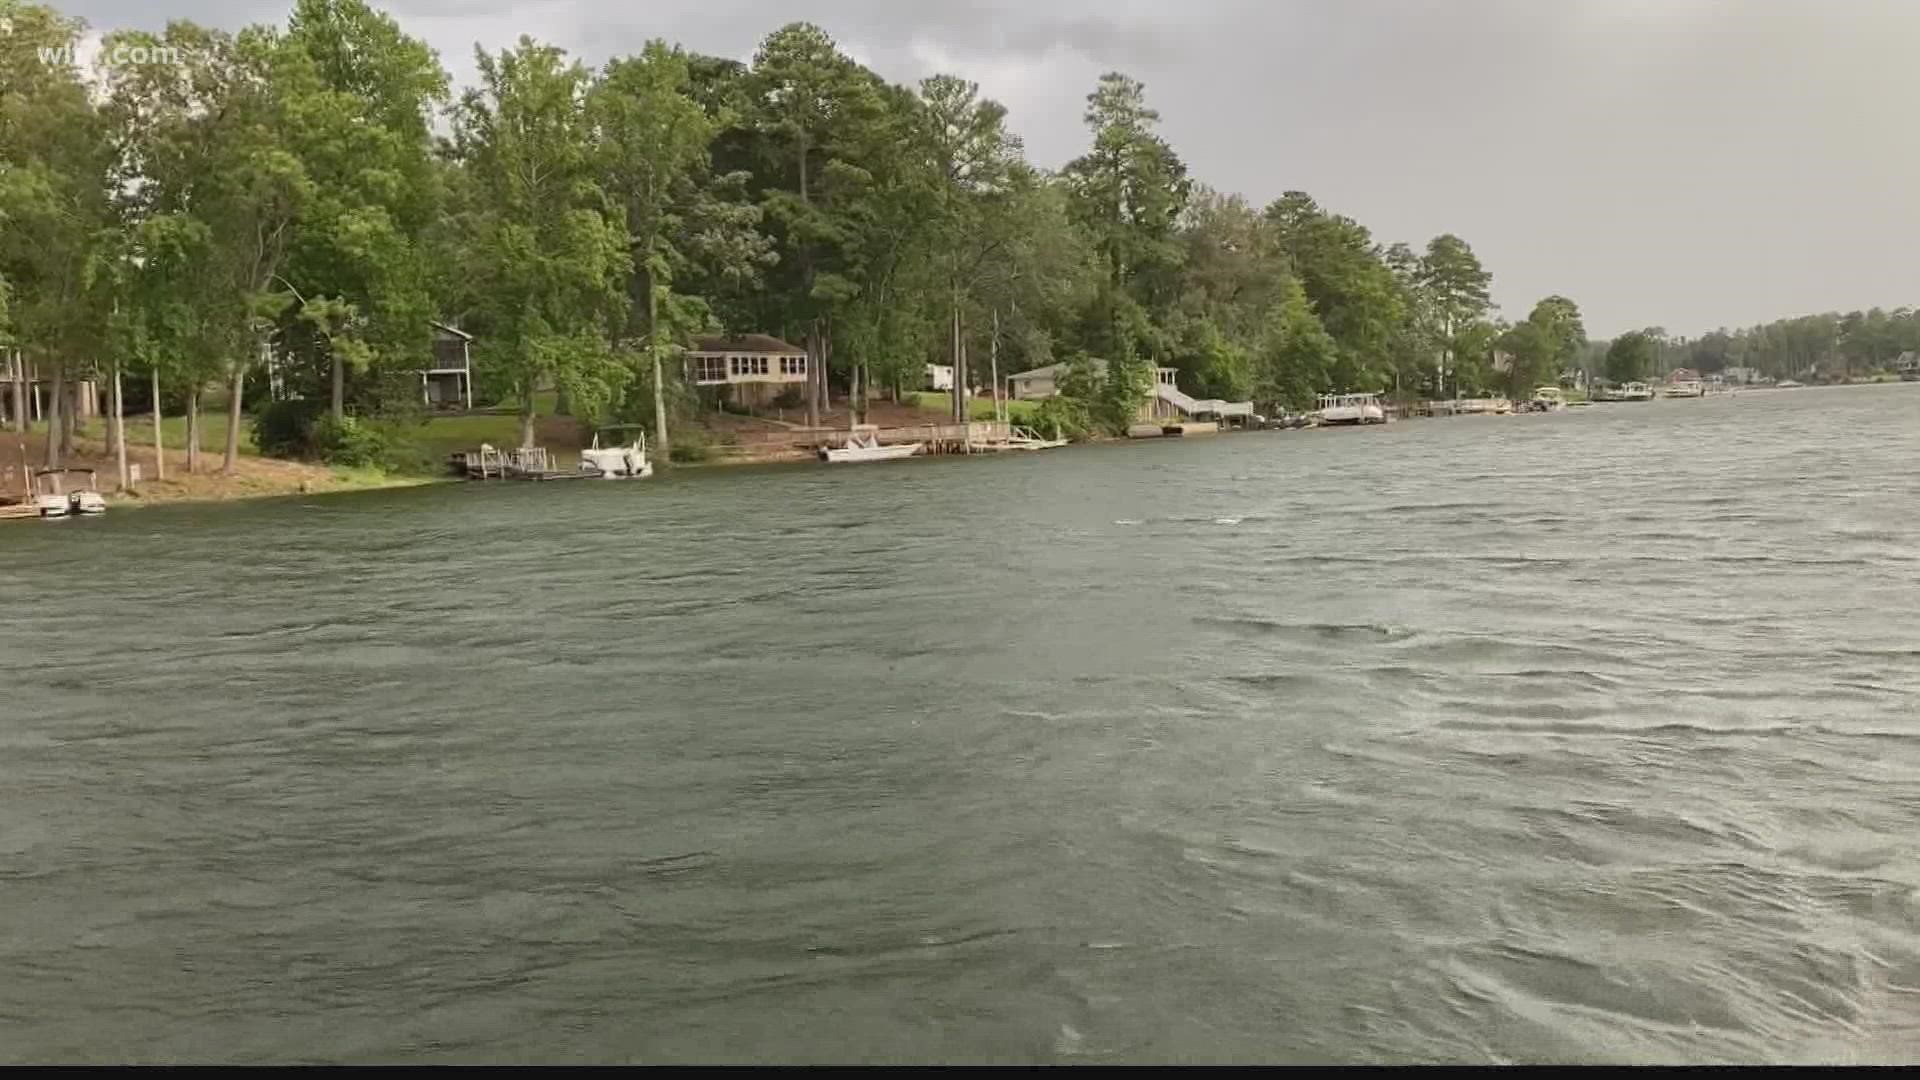 Dominion Energy will lower the water levels in Lake Murray this fall. Here's why and how soon you can expect to see crews out working.